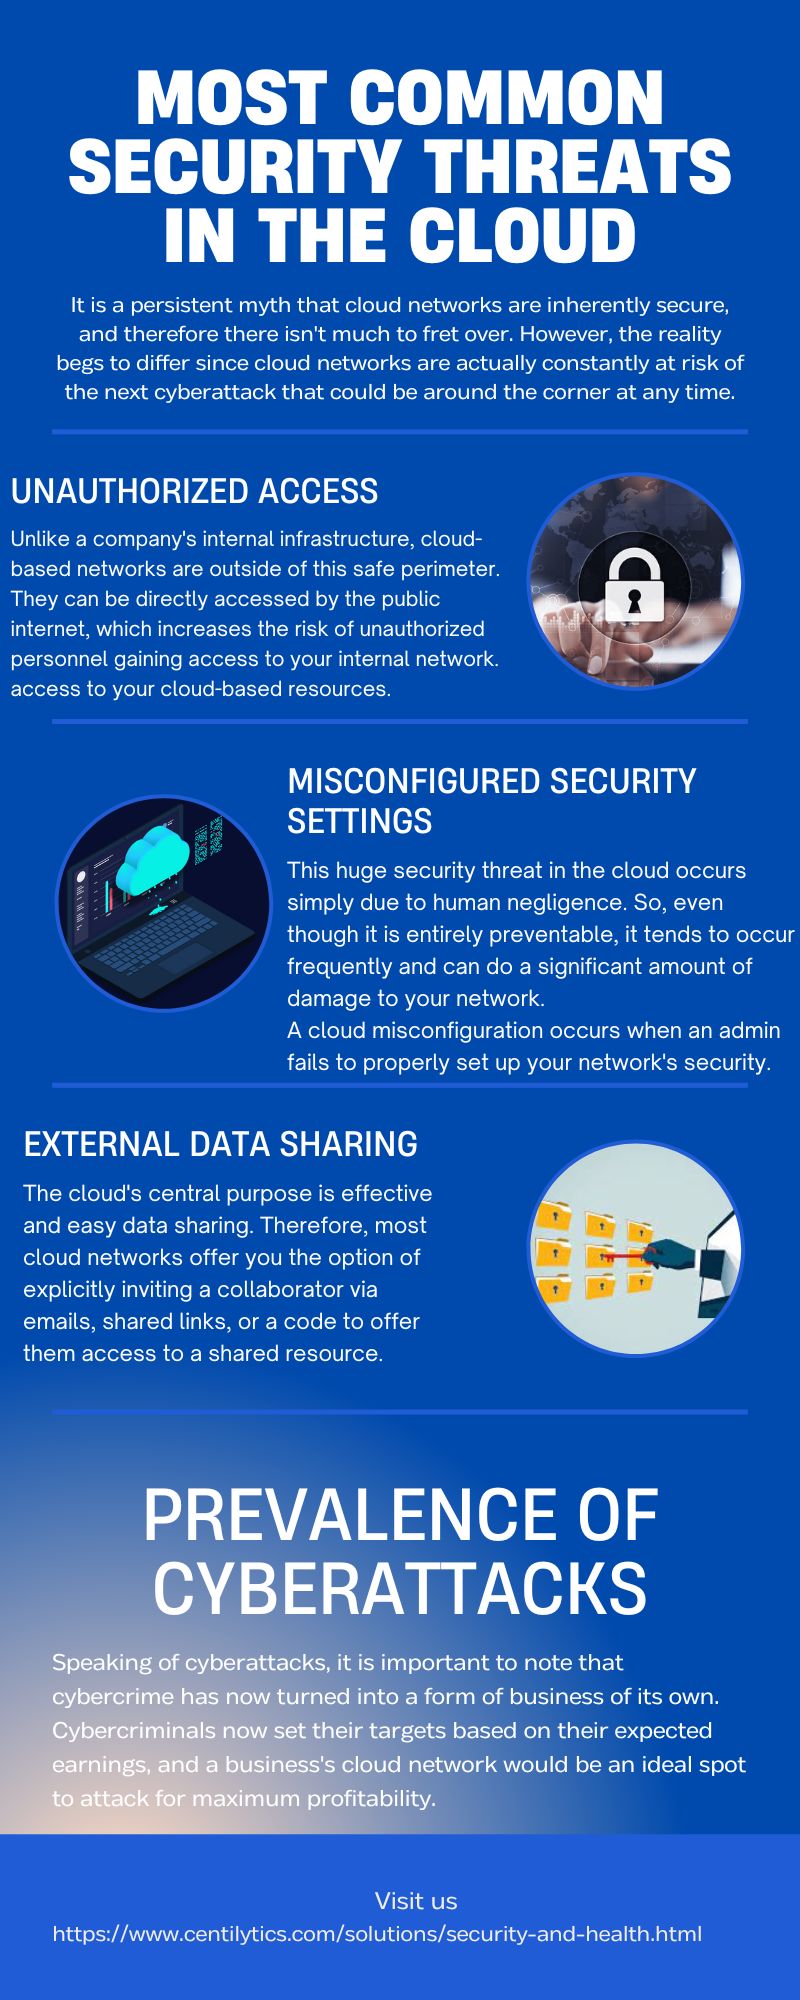 Most Common Security Threats in the Cloud